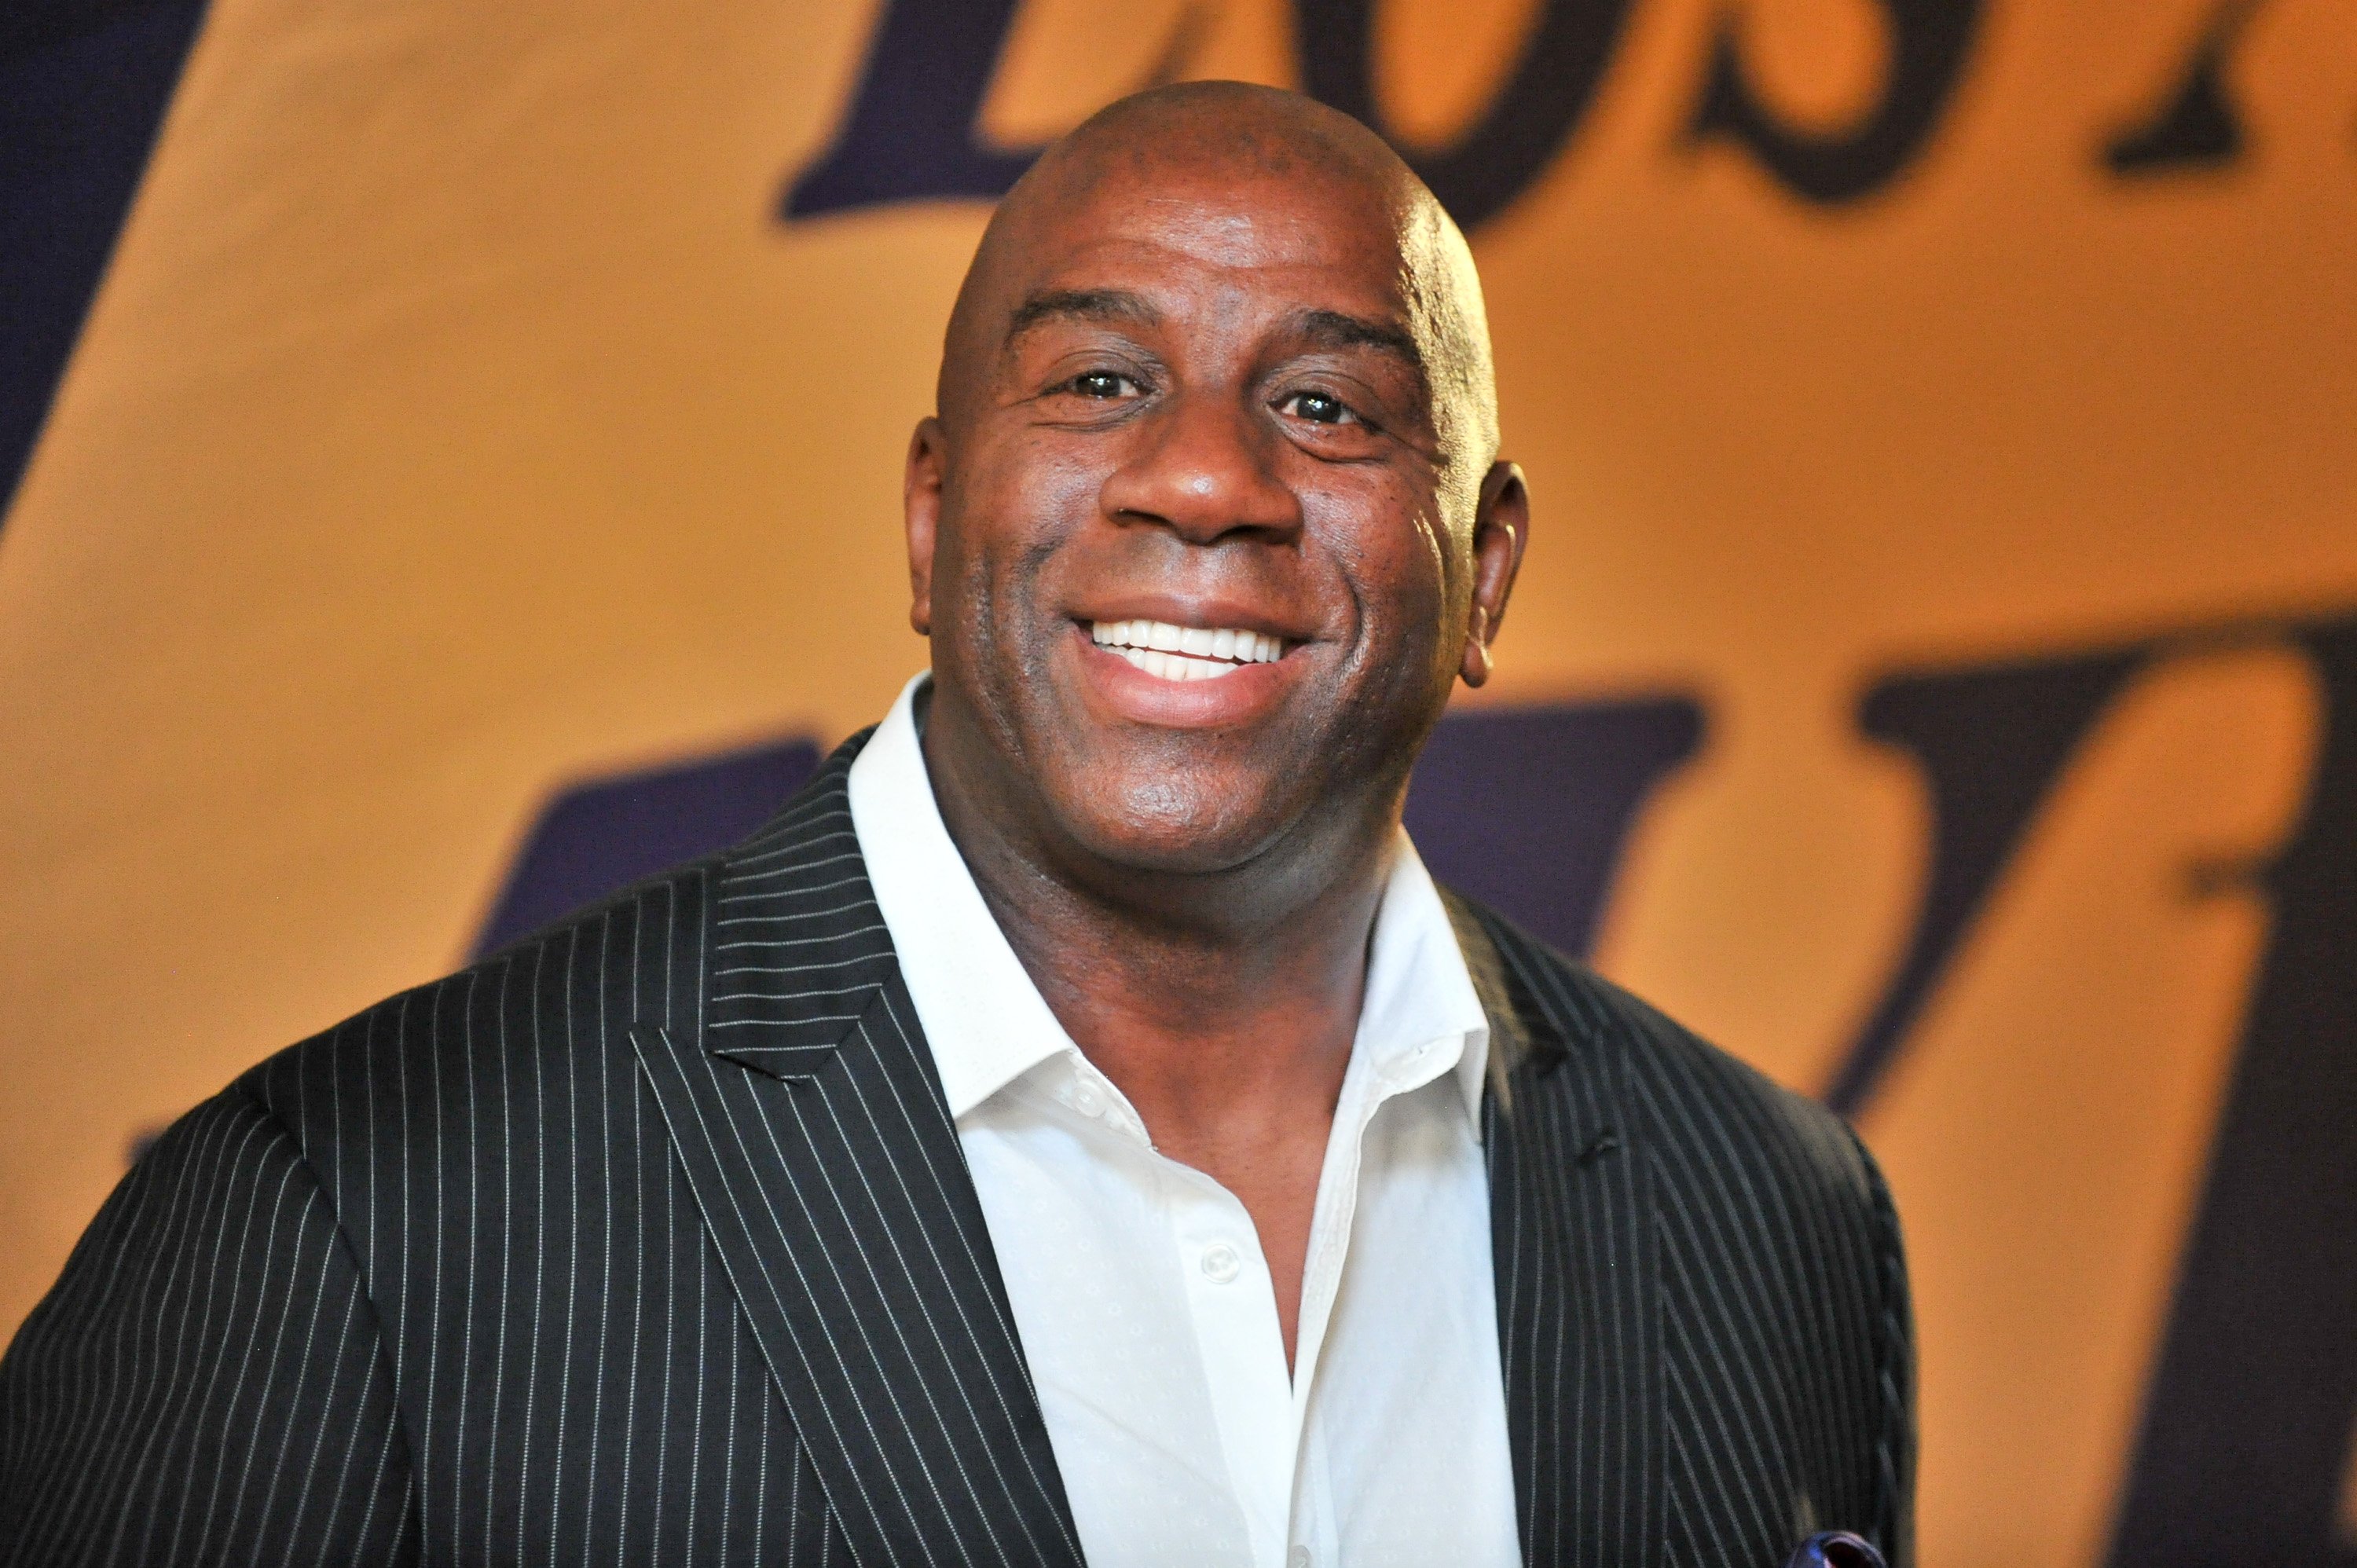 Magic Johnson pictured at the Staples Center in Los Angeles, California on October 19, 2017. | Photo: Getty Images